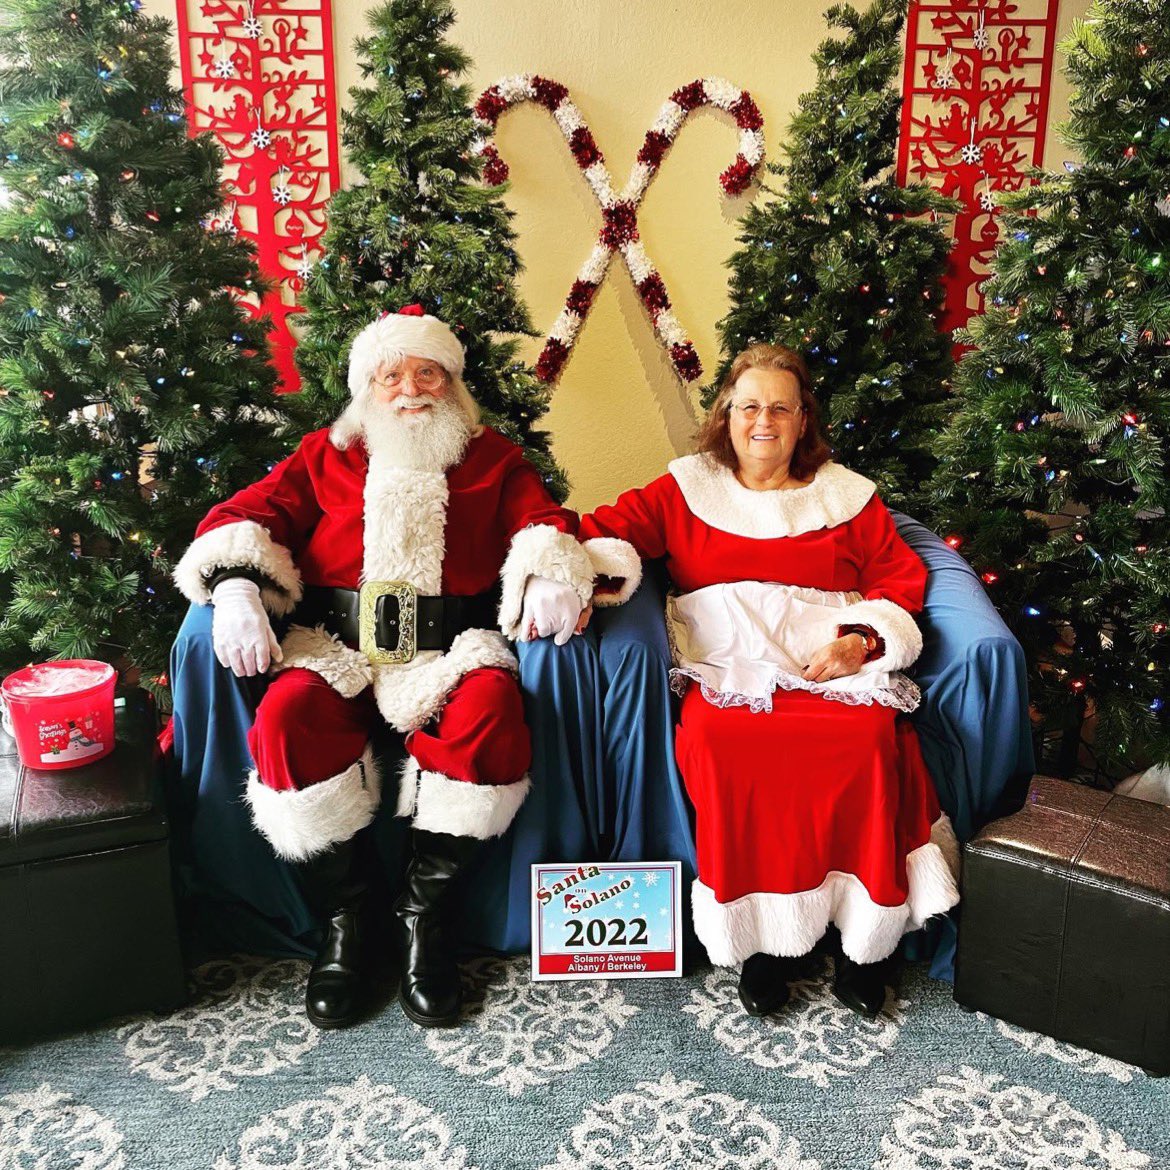 Santa and Mrs. Claus had a fine weekend on Solano Avenue. They’ll be back next weekend and the one after that!! 🗓️ First 3 weekends in Dec 🕰️ 12-3pm 📍 1758 Solano Ave 📸 Bring your camera to take as many photos as you like. 🎅🤶 Santa is pet-friendly